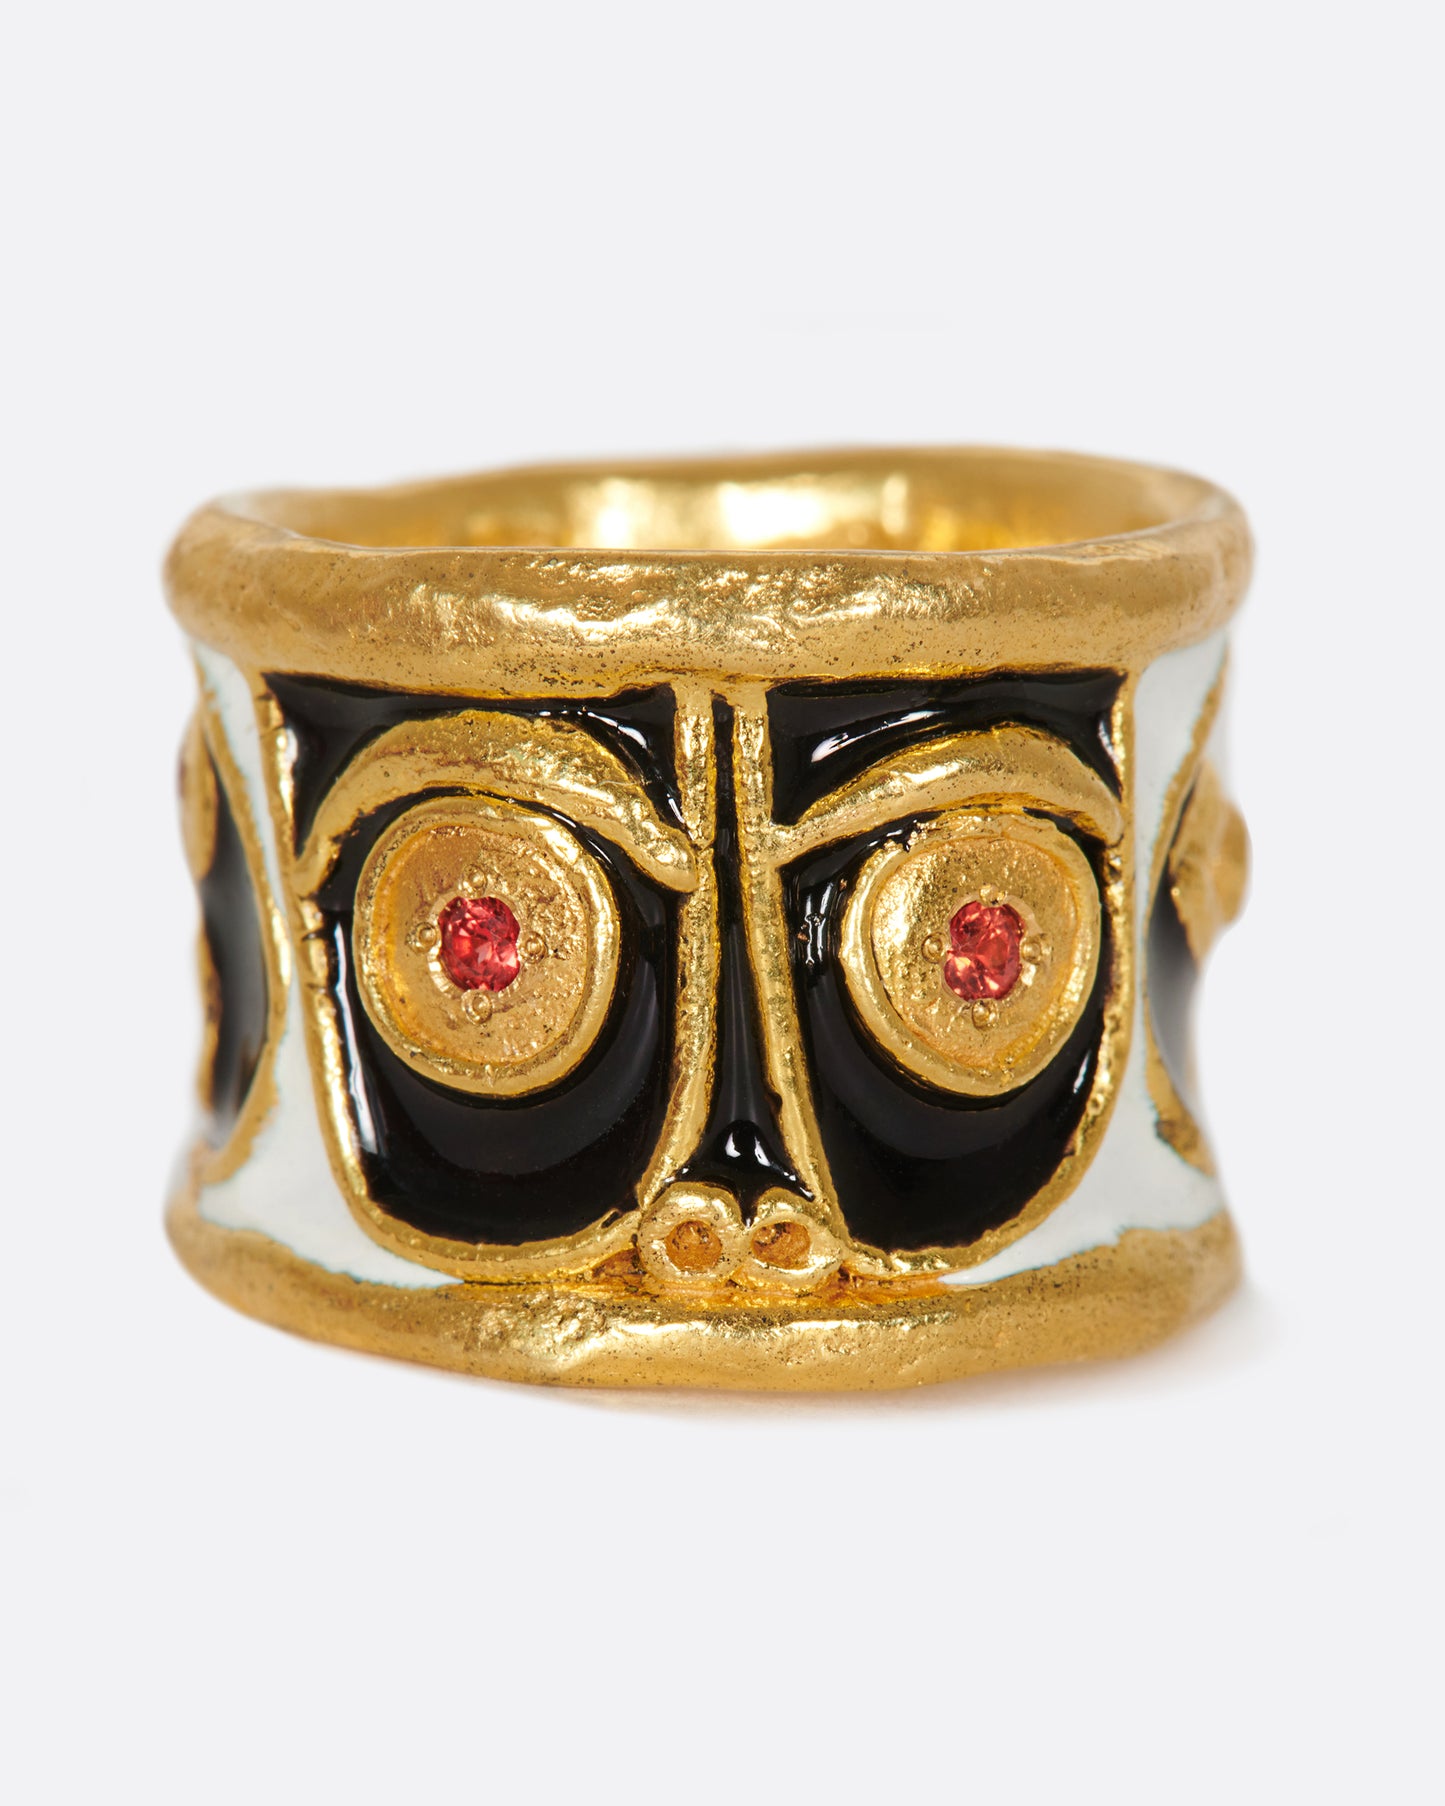 A handcrafted, high karat gold band with three faces illuminated by black and white enamel, and brightly colored stone eyes.